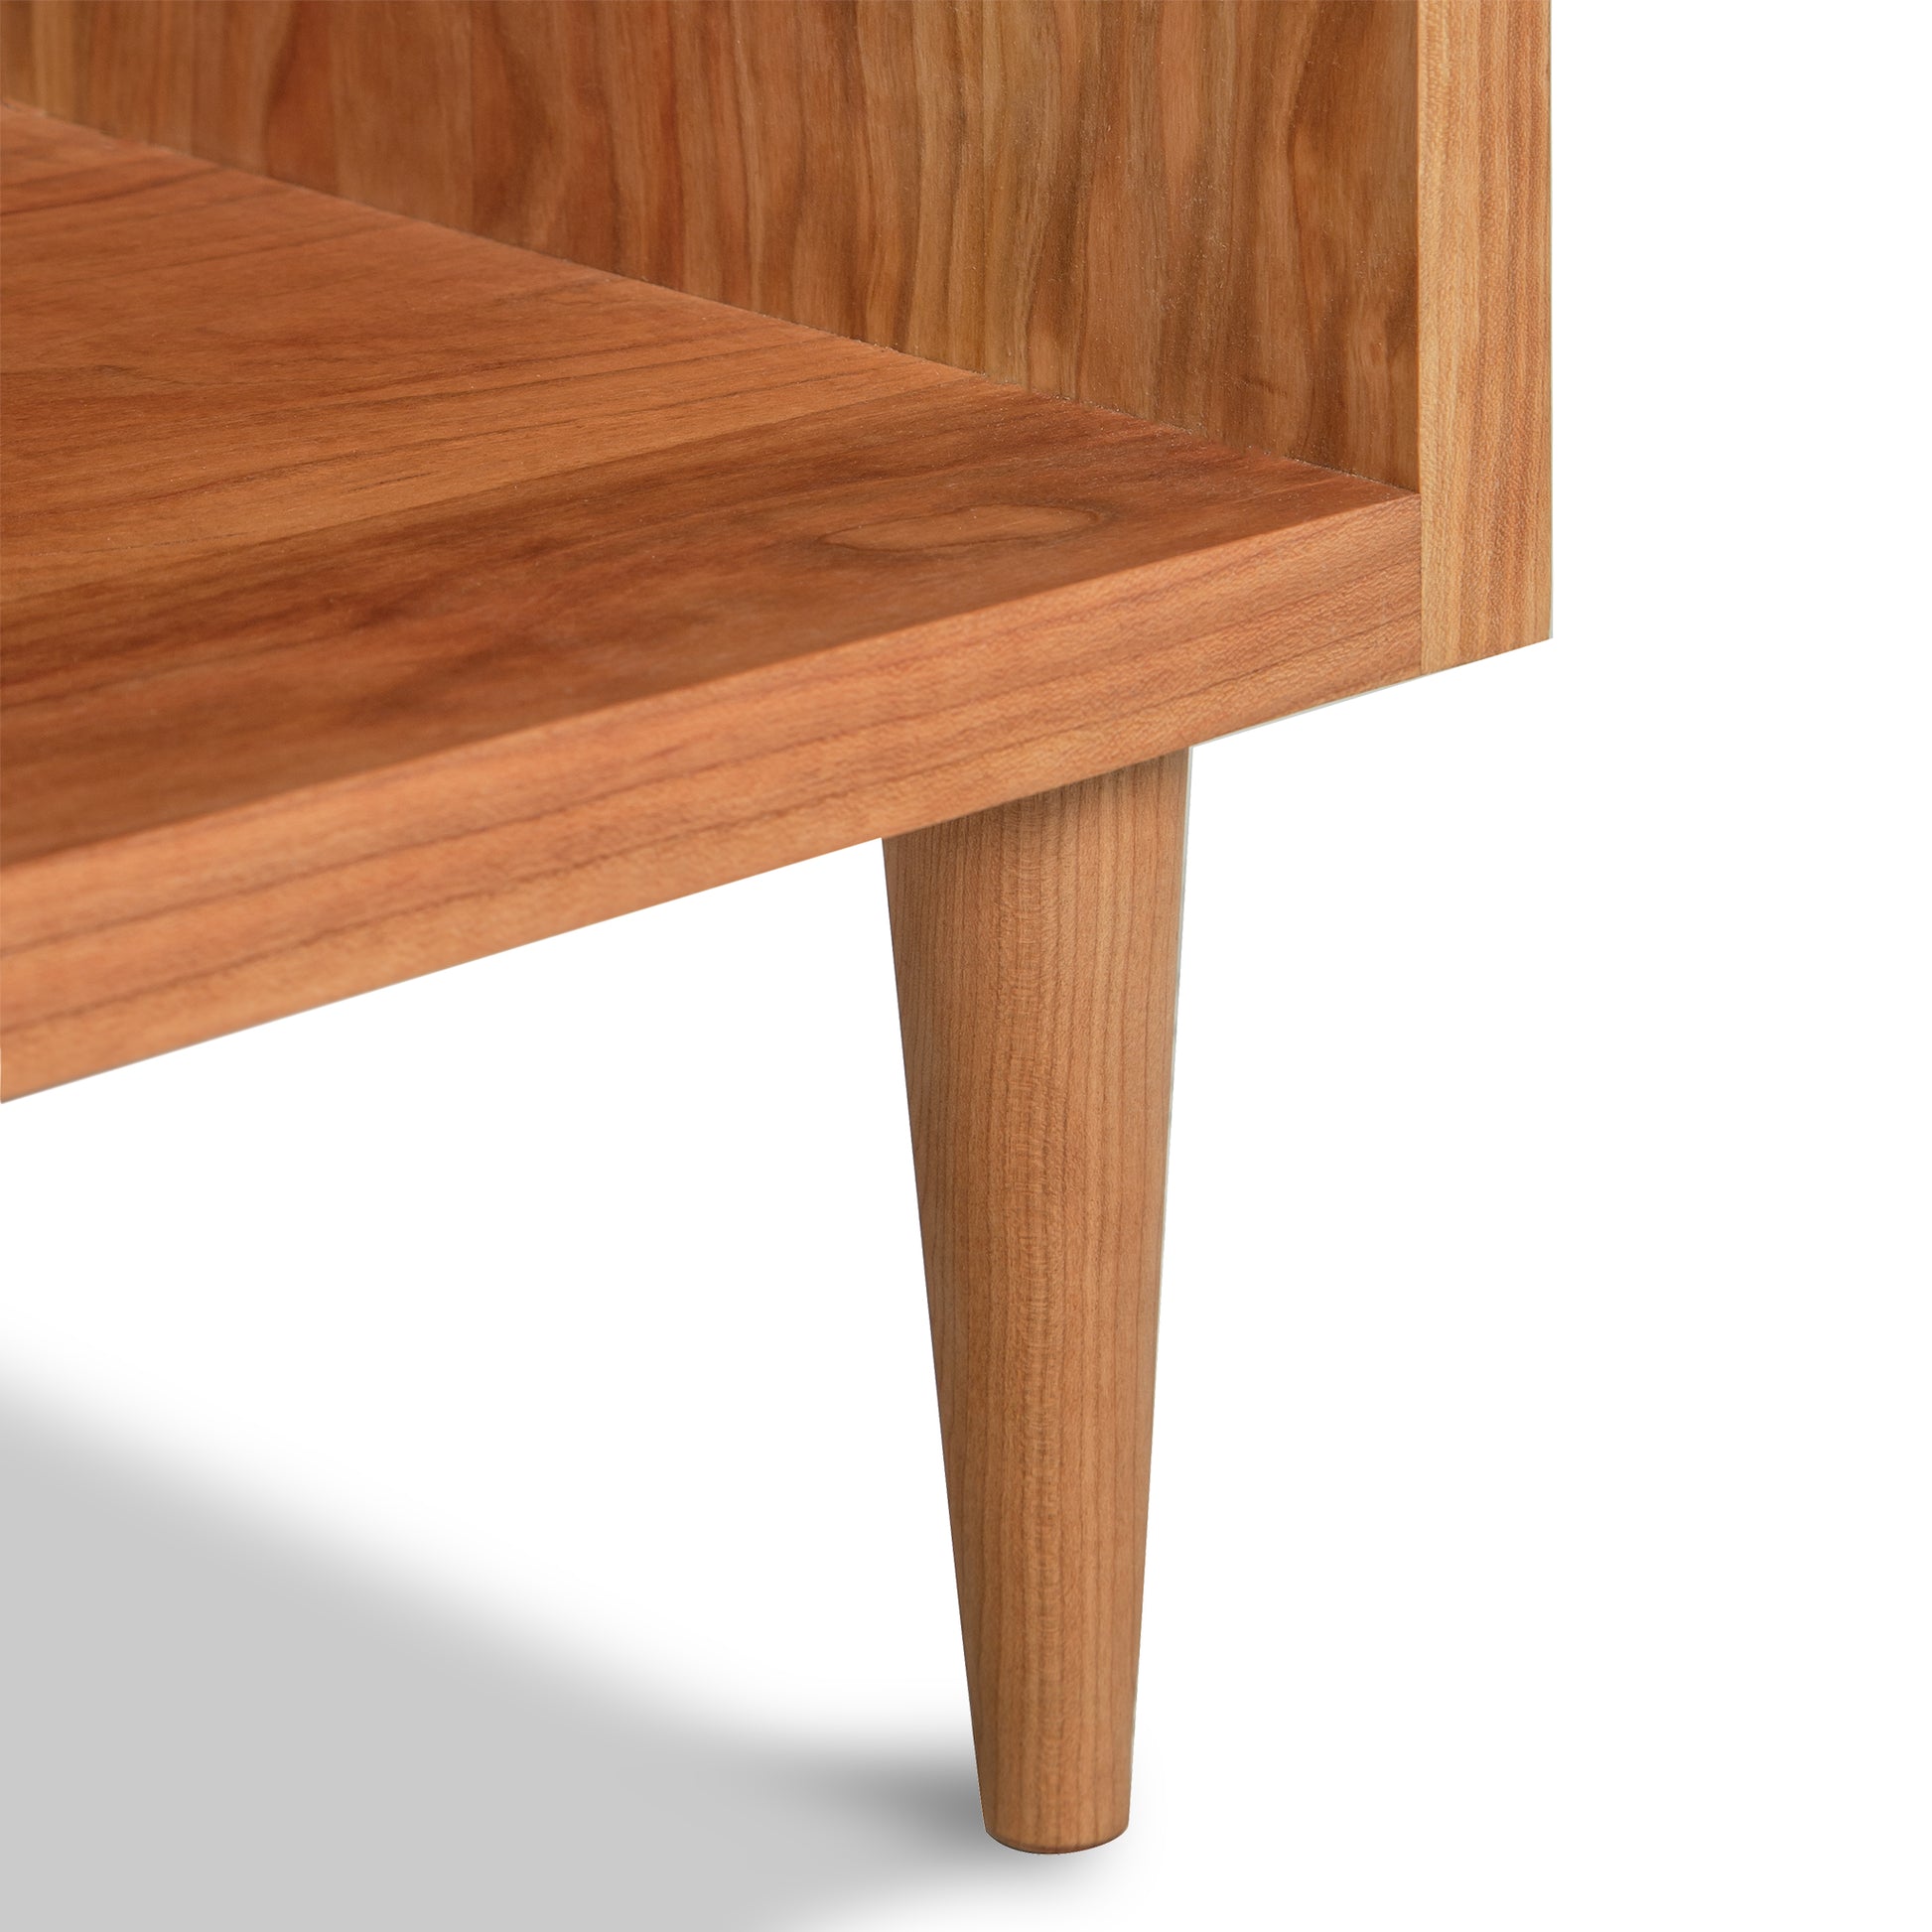 A close up of a wooden shelf from the Vermont Furniture Designs Larssen 1-Drawer Wide Nightstand with wooden legs.